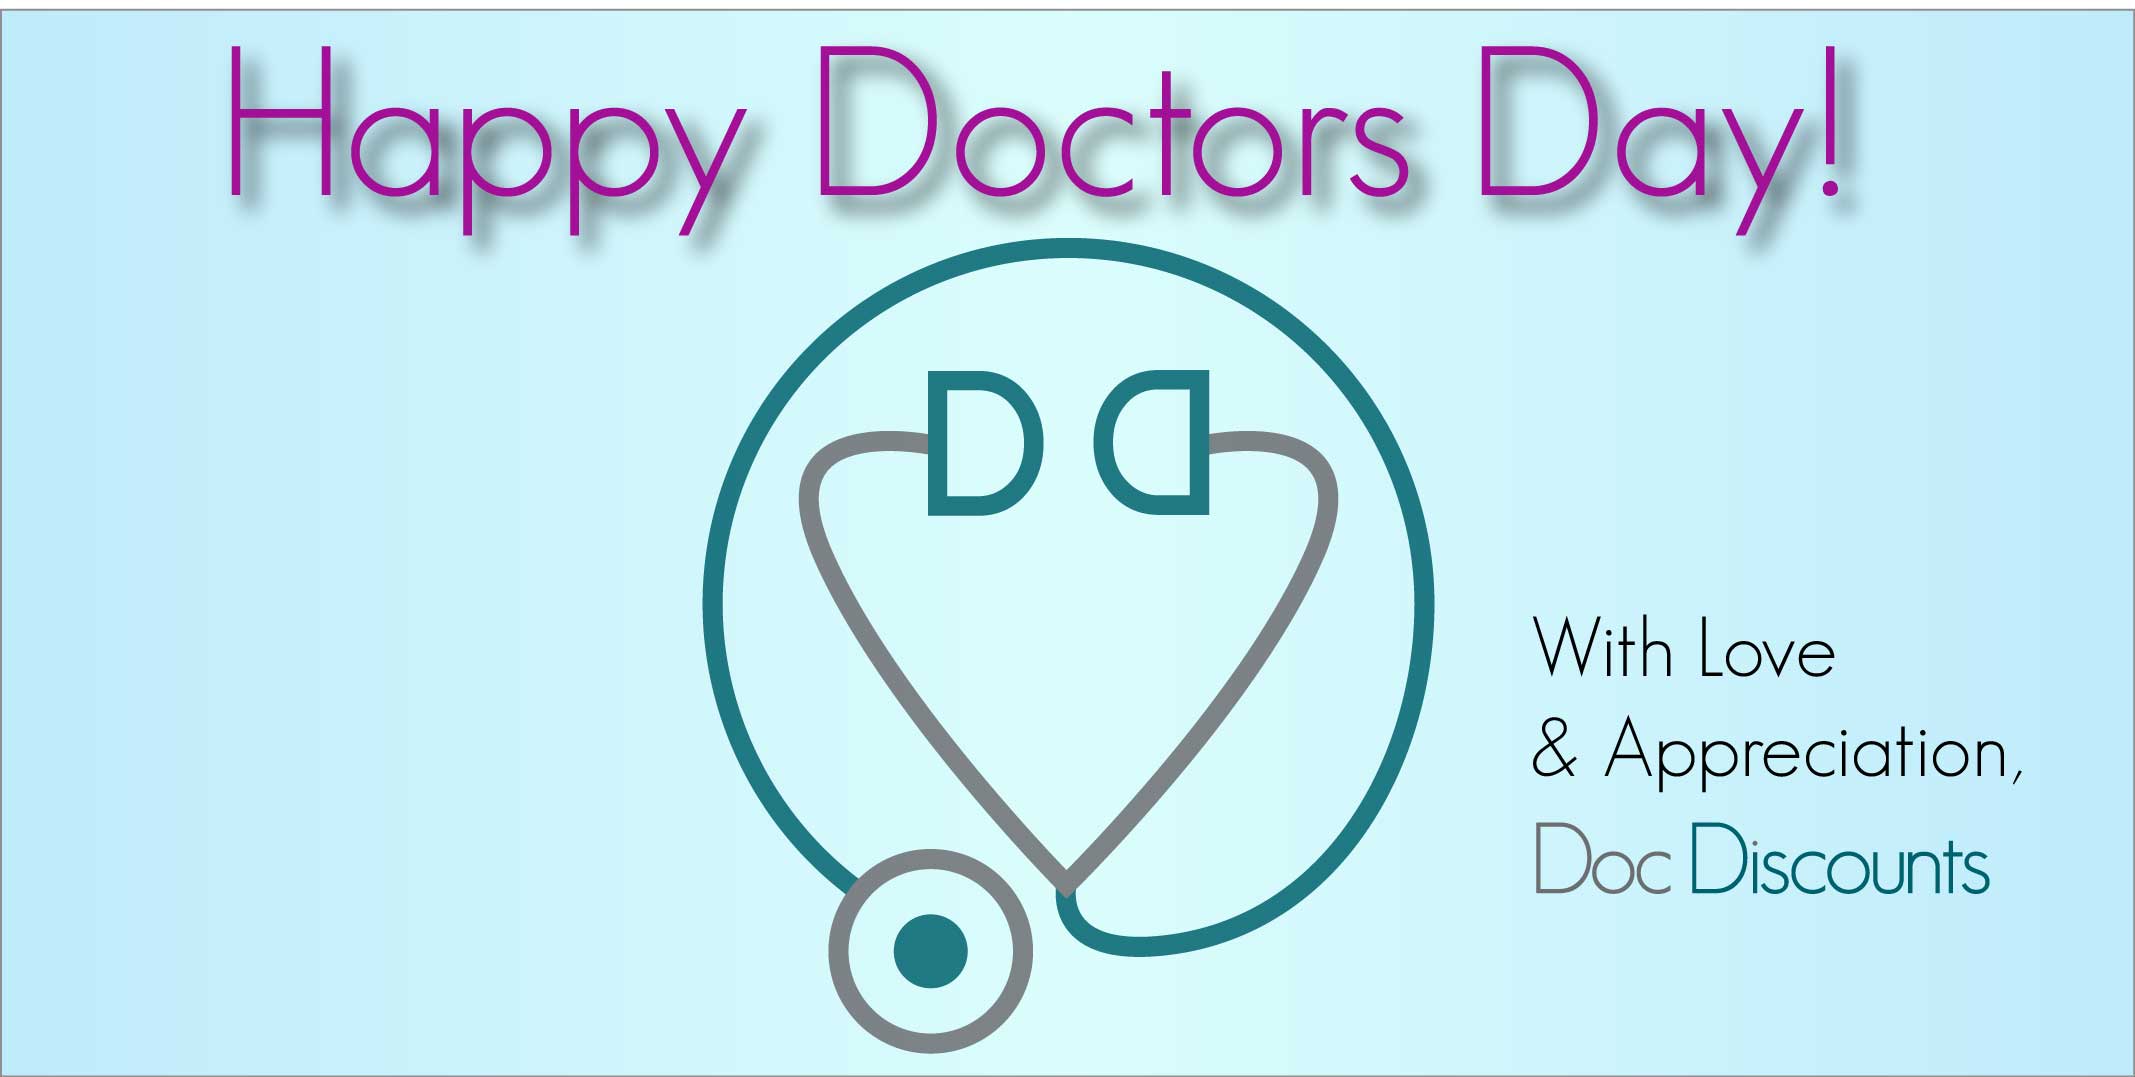 Happy Doctors Day with Love